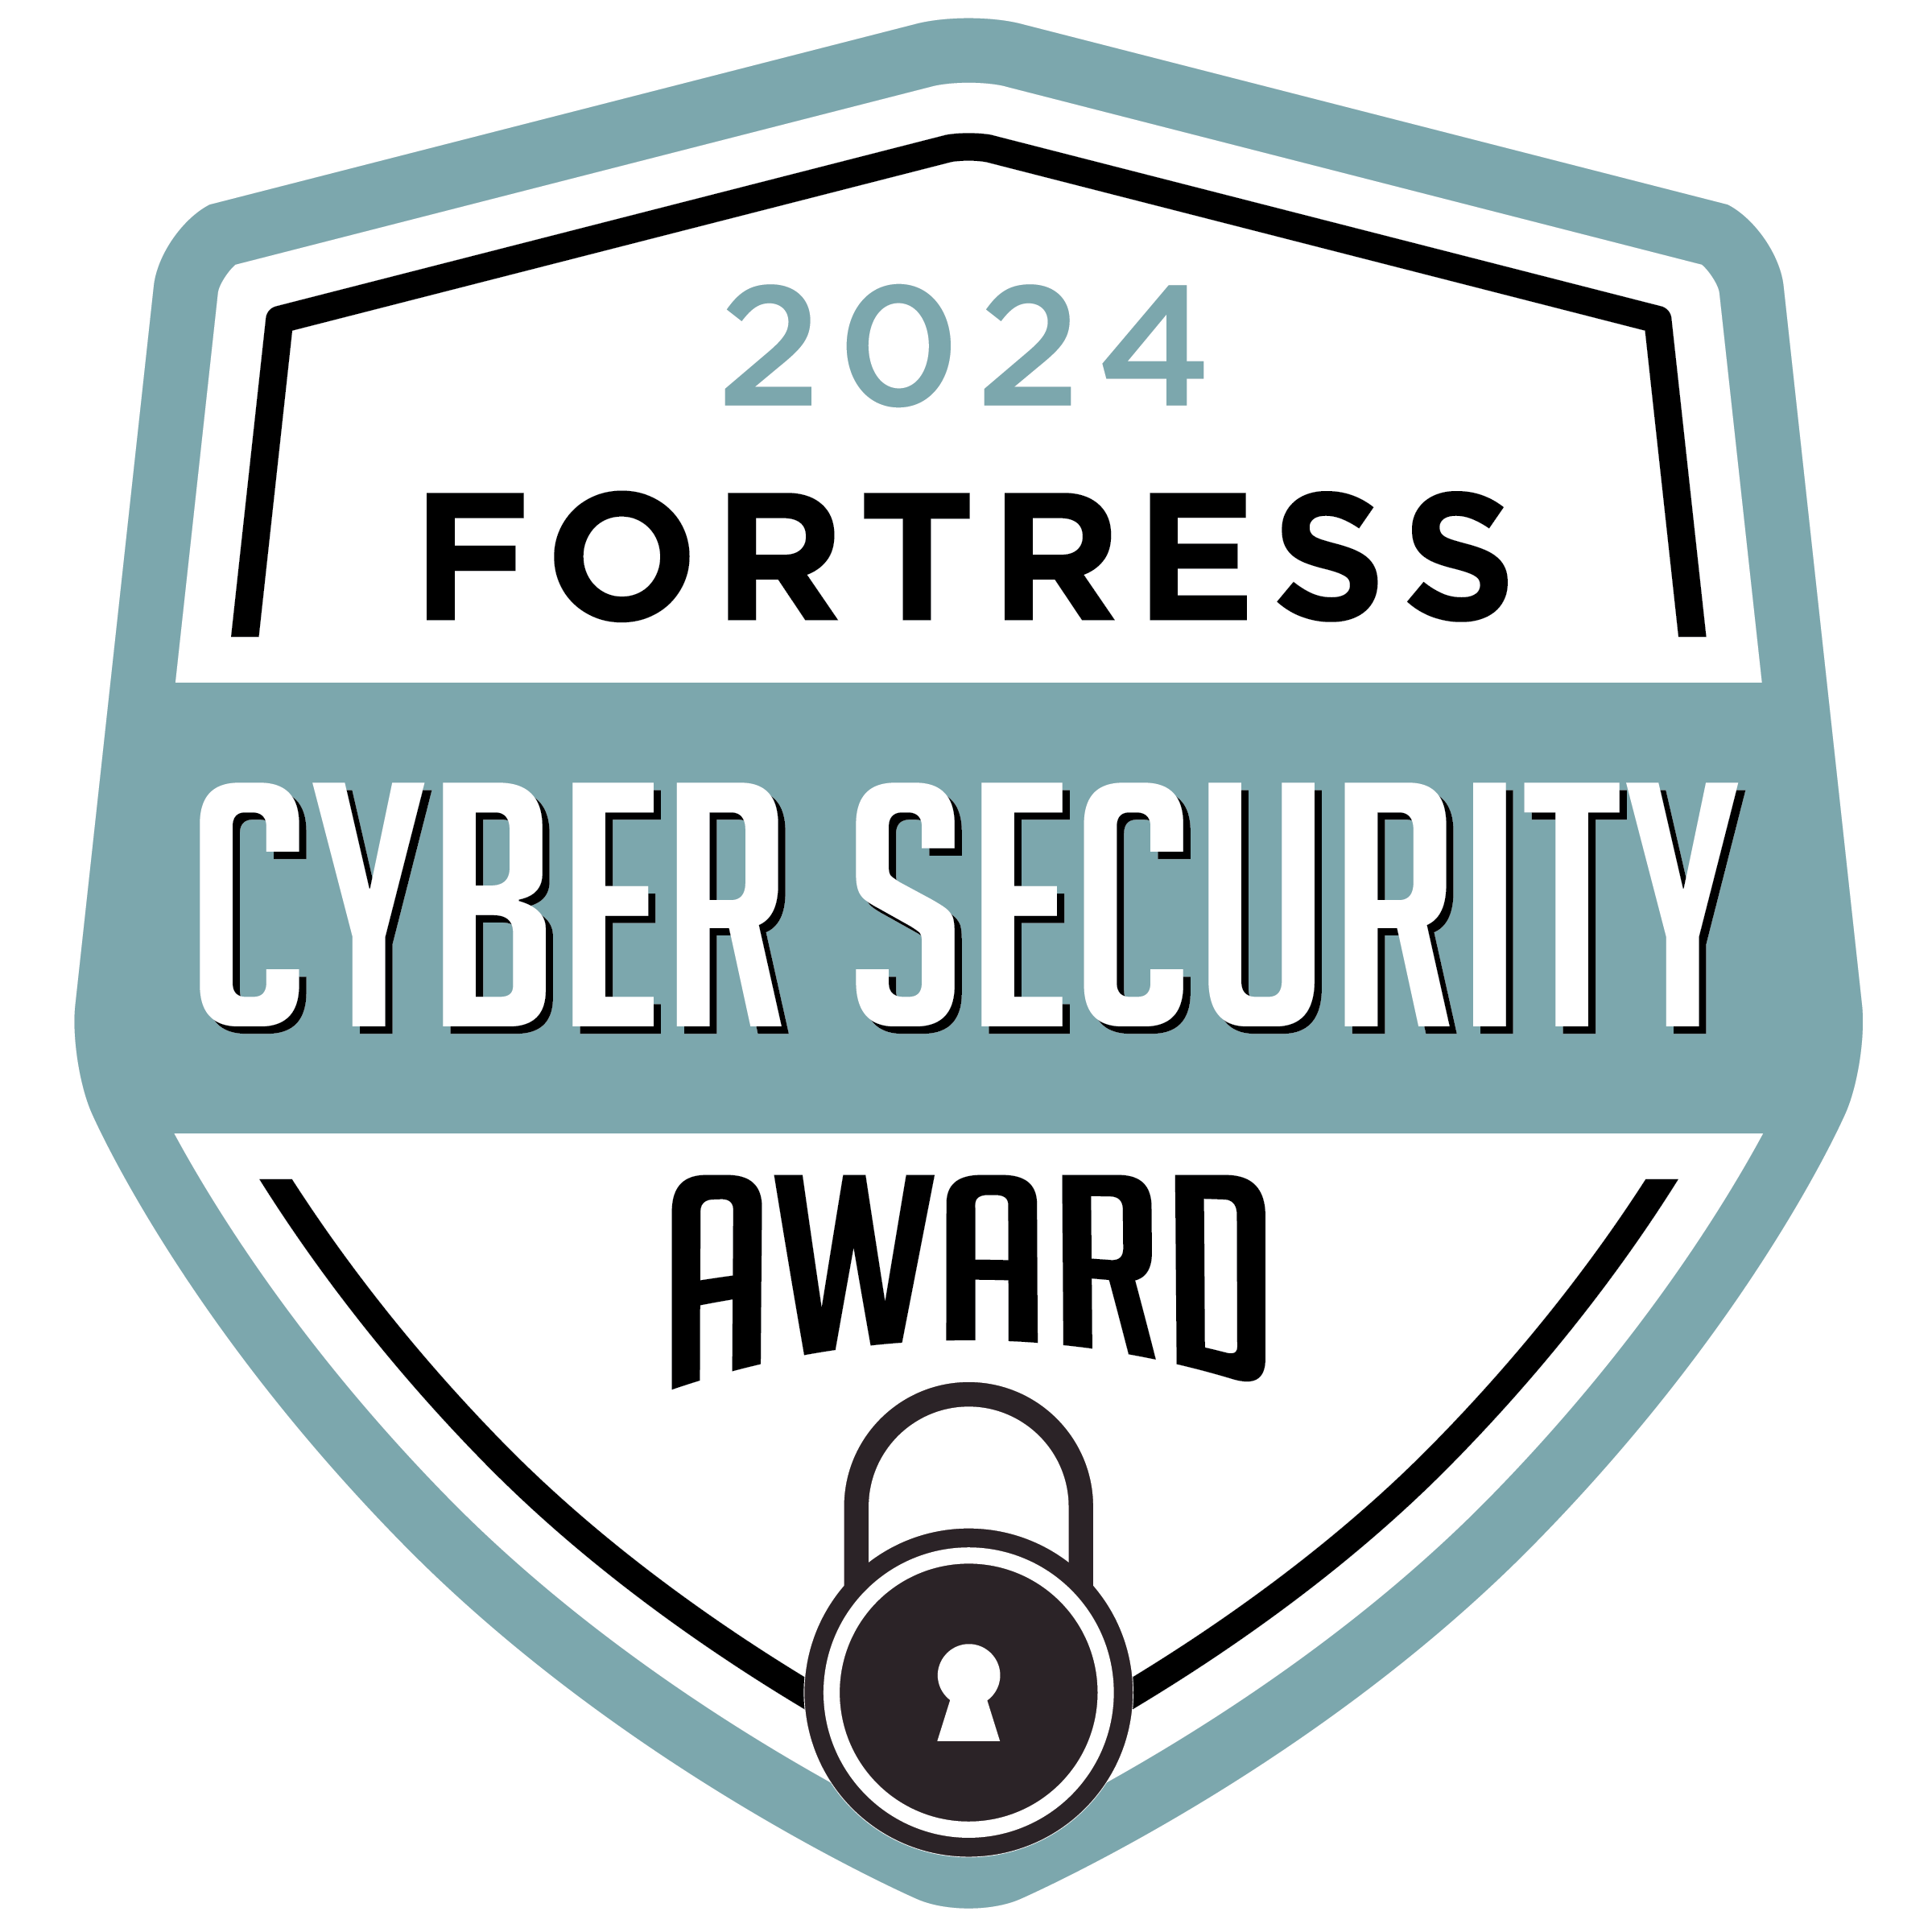 Fortress Cyber Security Award 2024